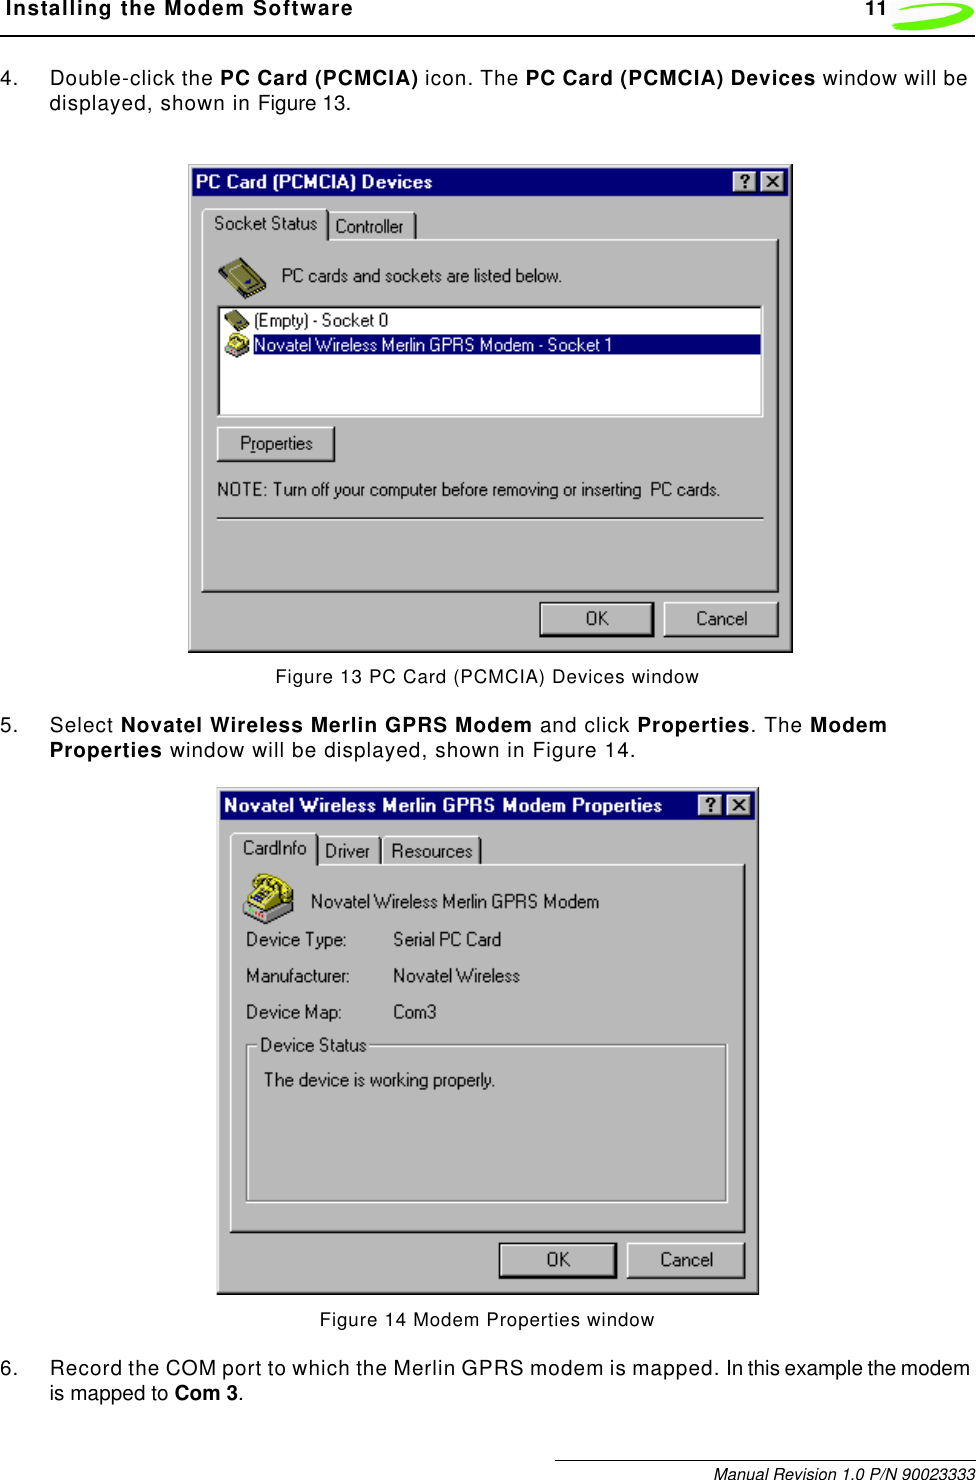  Installing the Modem Software 11Manual Revision 1.0 P/N 900233334. Double-click the PC Card (PCMCIA) icon. The PC Card (PCMCIA) Devices window will be displayed, shown in Figure 13.Figure 13 PC Card (PCMCIA) Devices window5. Select Novatel Wireless Merlin GPRS Modem and click Properties. The Modem Properties window will be displayed, shown in Figure 14.Figure 14 Modem Properties window6. Record the COM port to which the Merlin GPRS modem is mapped. In this example the modem is mapped to Com 3.